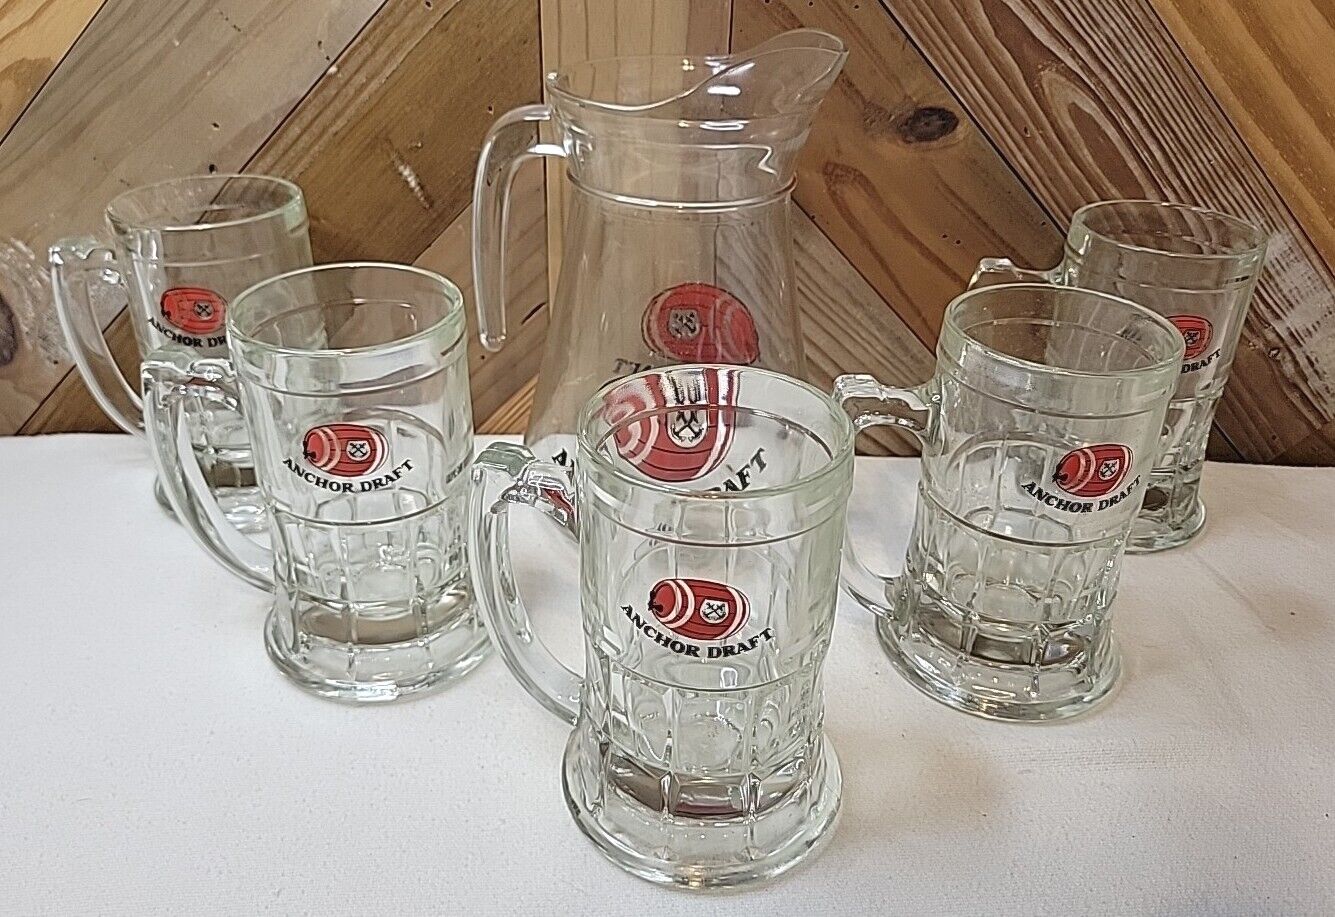 Vintage ANCHOR DRAFT Beer Pitcher & 5 GLASS Lot. Very Rare Set With Pitcher. 